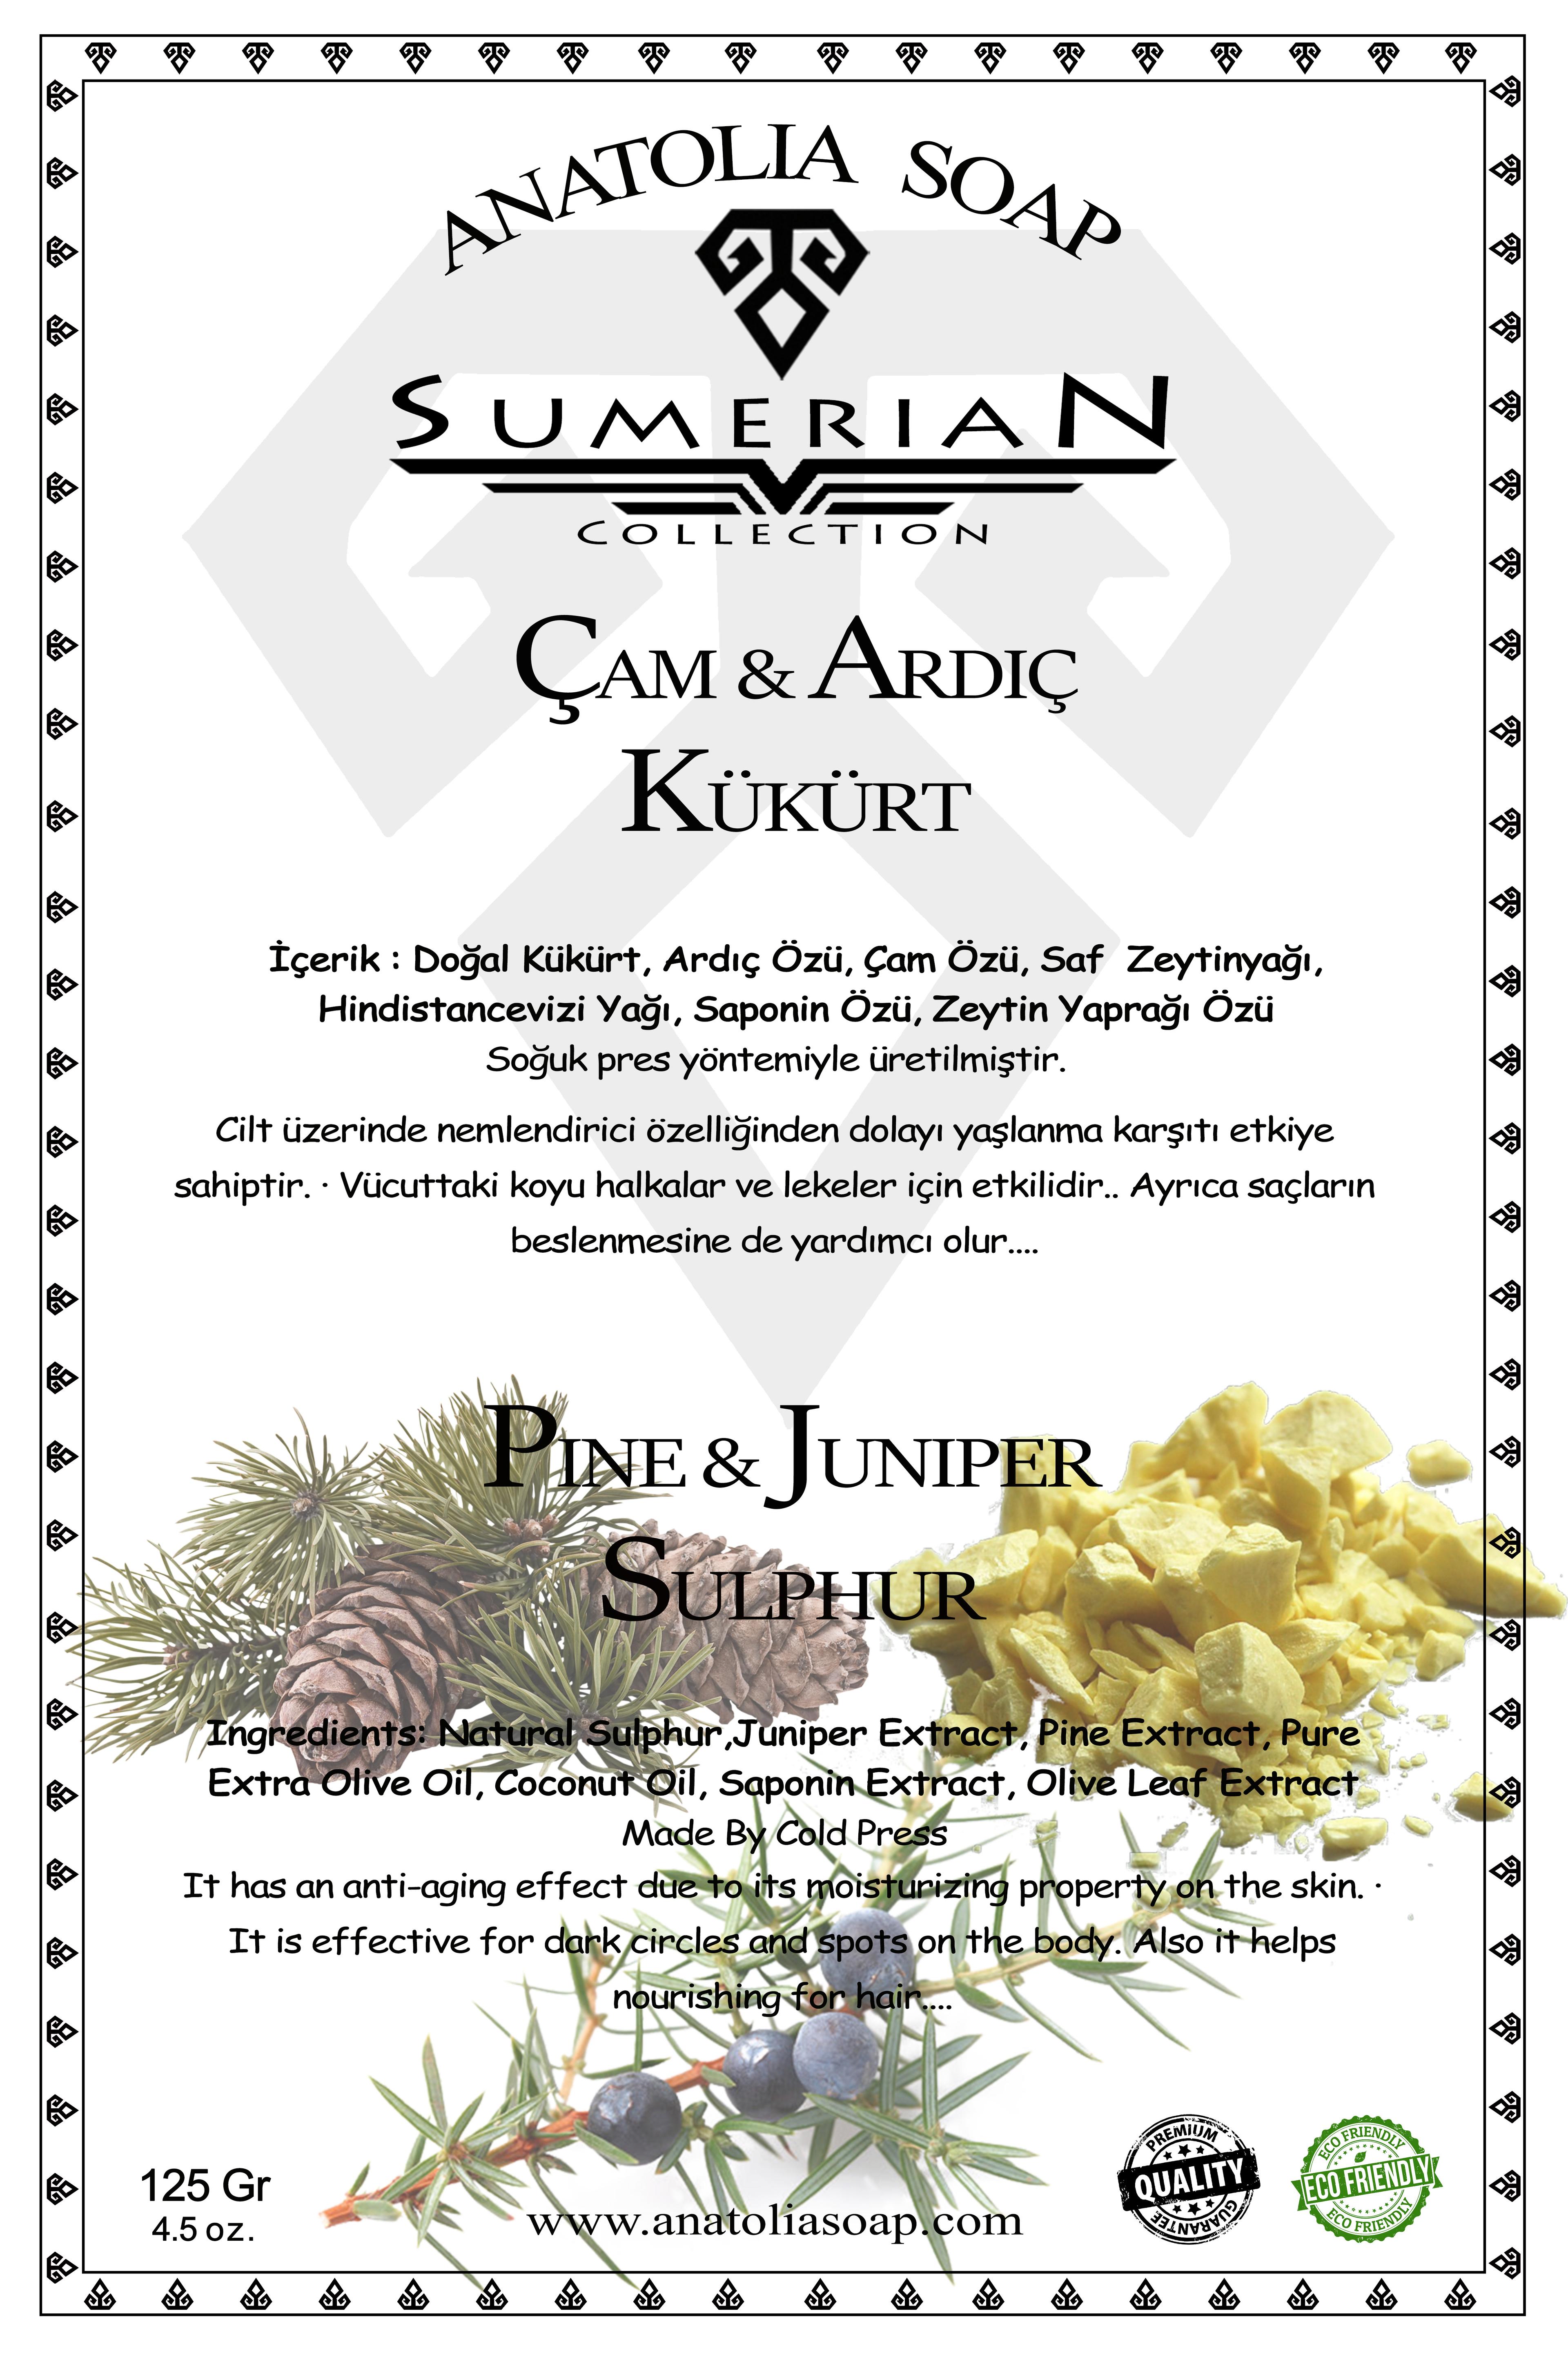 Get Rid of Skin Disorders Such as Eczema, Fungus, Acne and Itching with Sumerian Collection Pine Juniper Sulfur Soap.